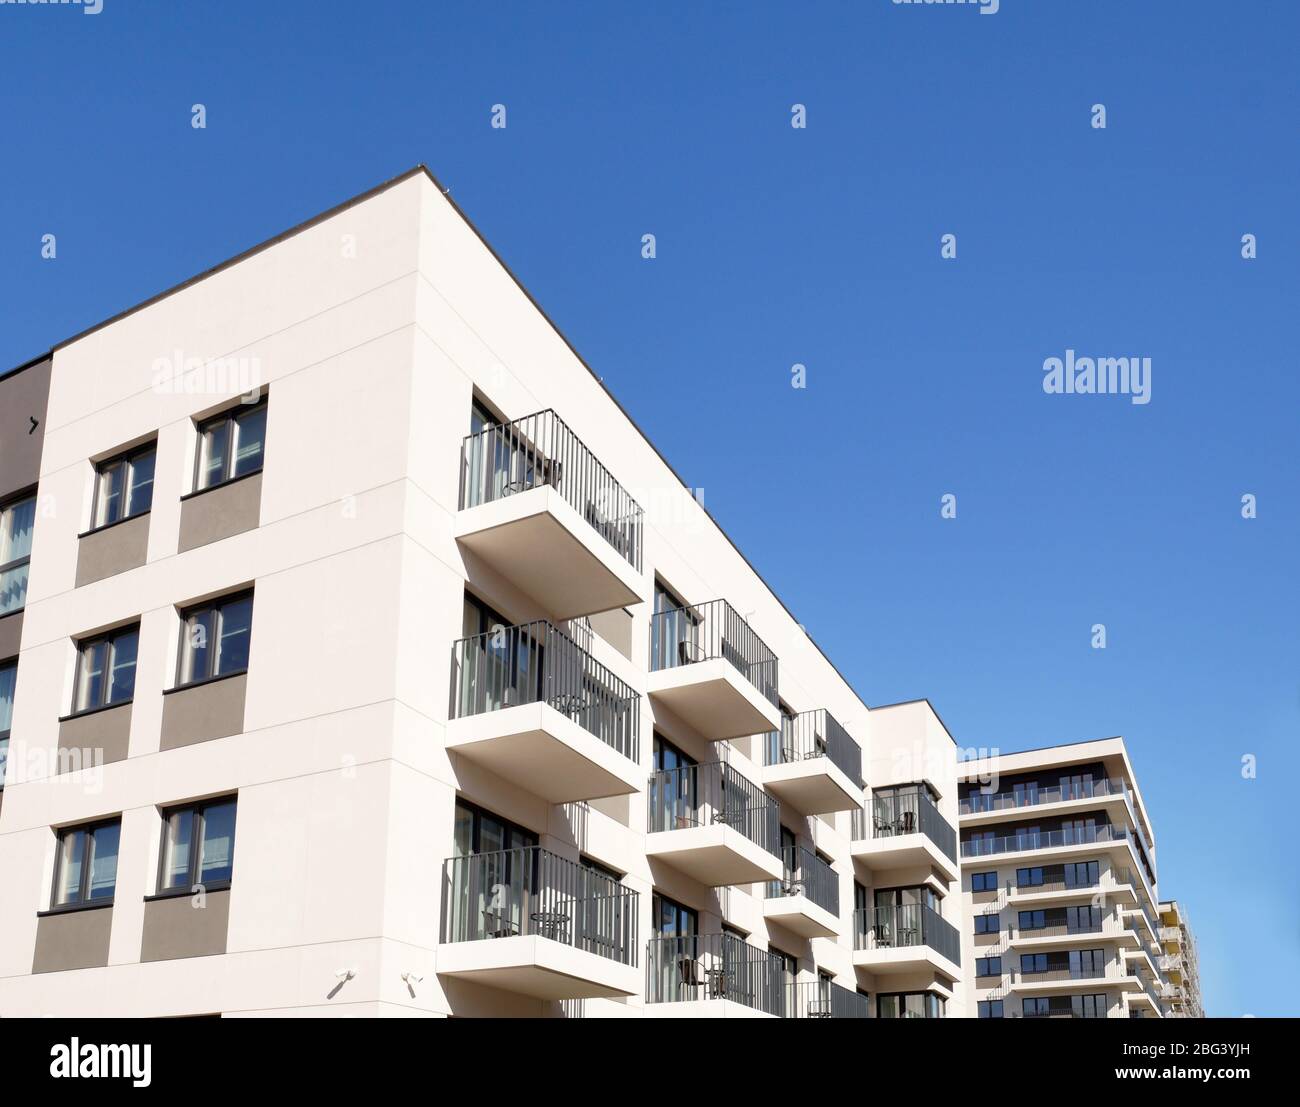 Construction of houses, final stage of construction. A newly built housing estate of multi-family houses. Stock Photo